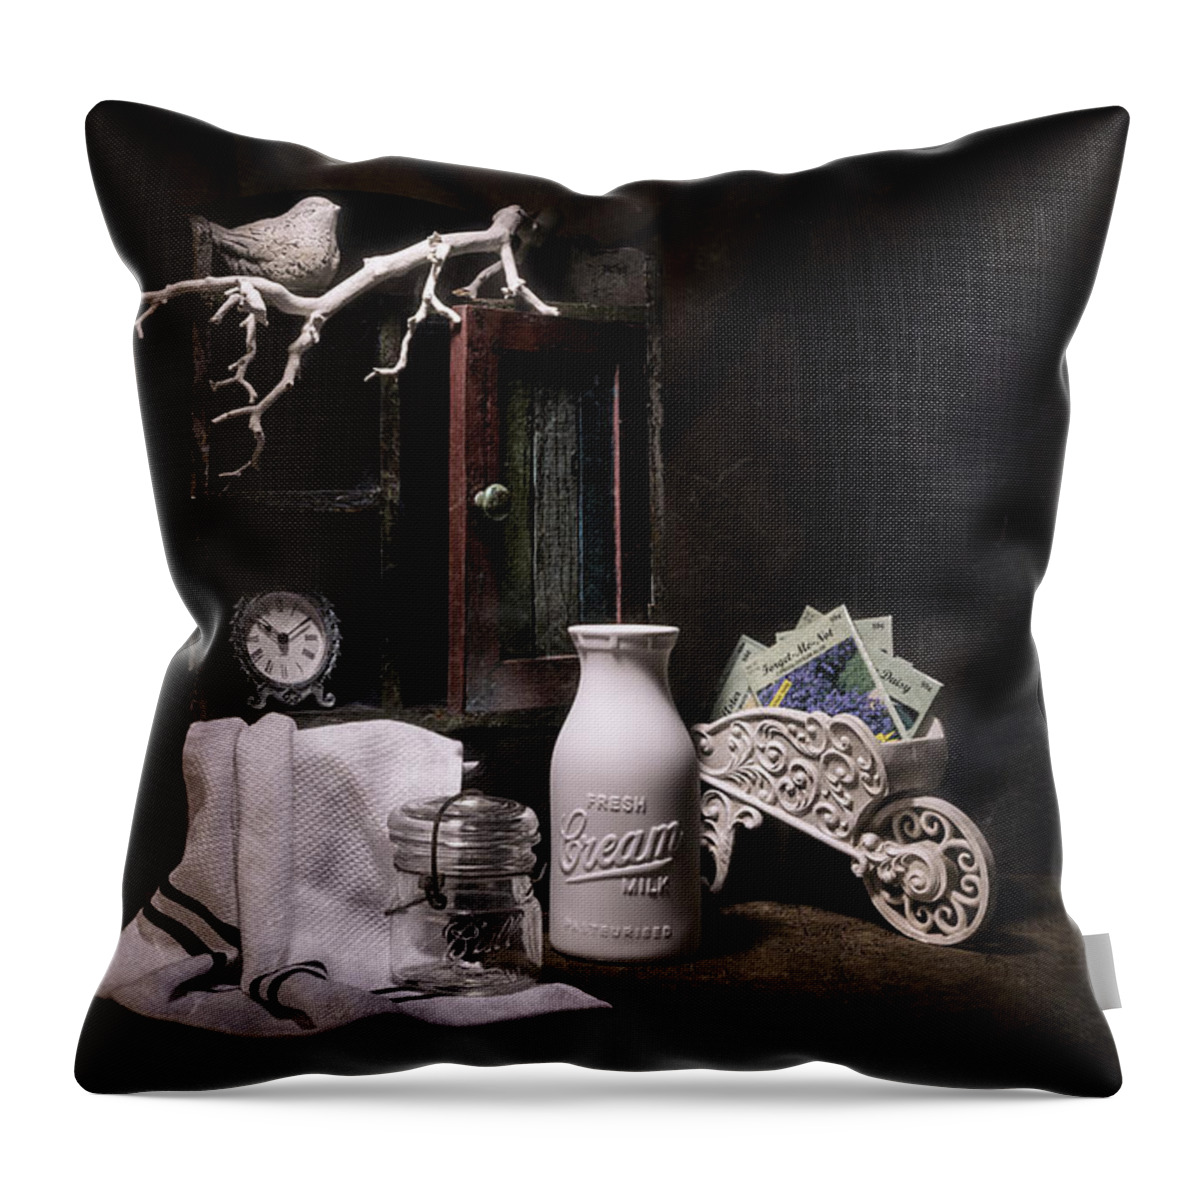 Jug Throw Pillow featuring the photograph Forget Me Not Still Life by Tom Mc Nemar